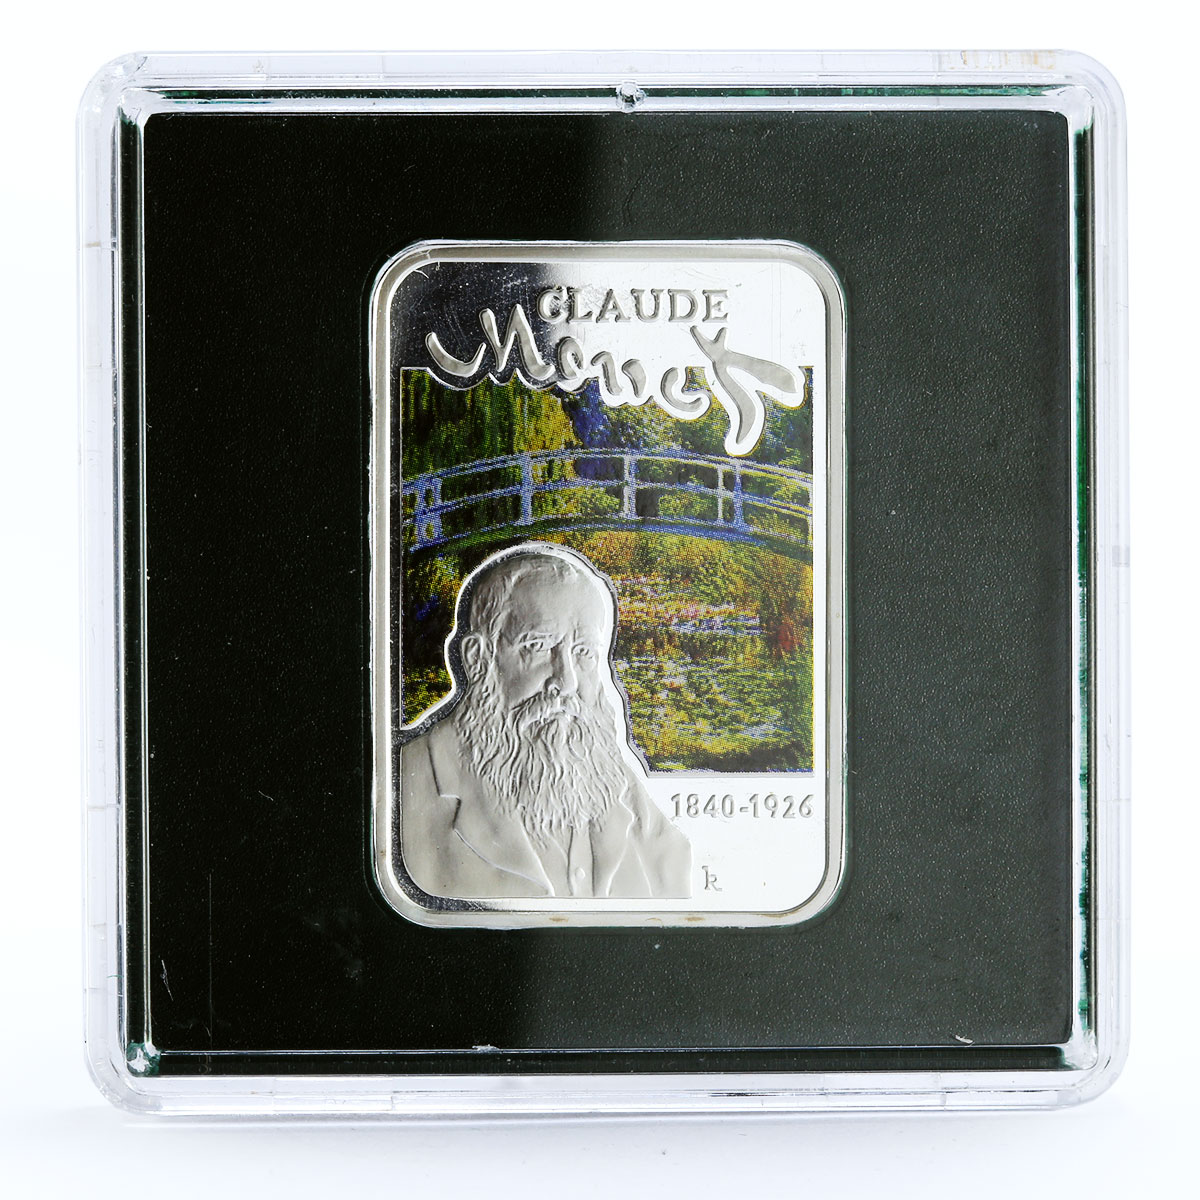 Niue 1 dollar Painters of the World Claude Monet Art colored silver coin 2010